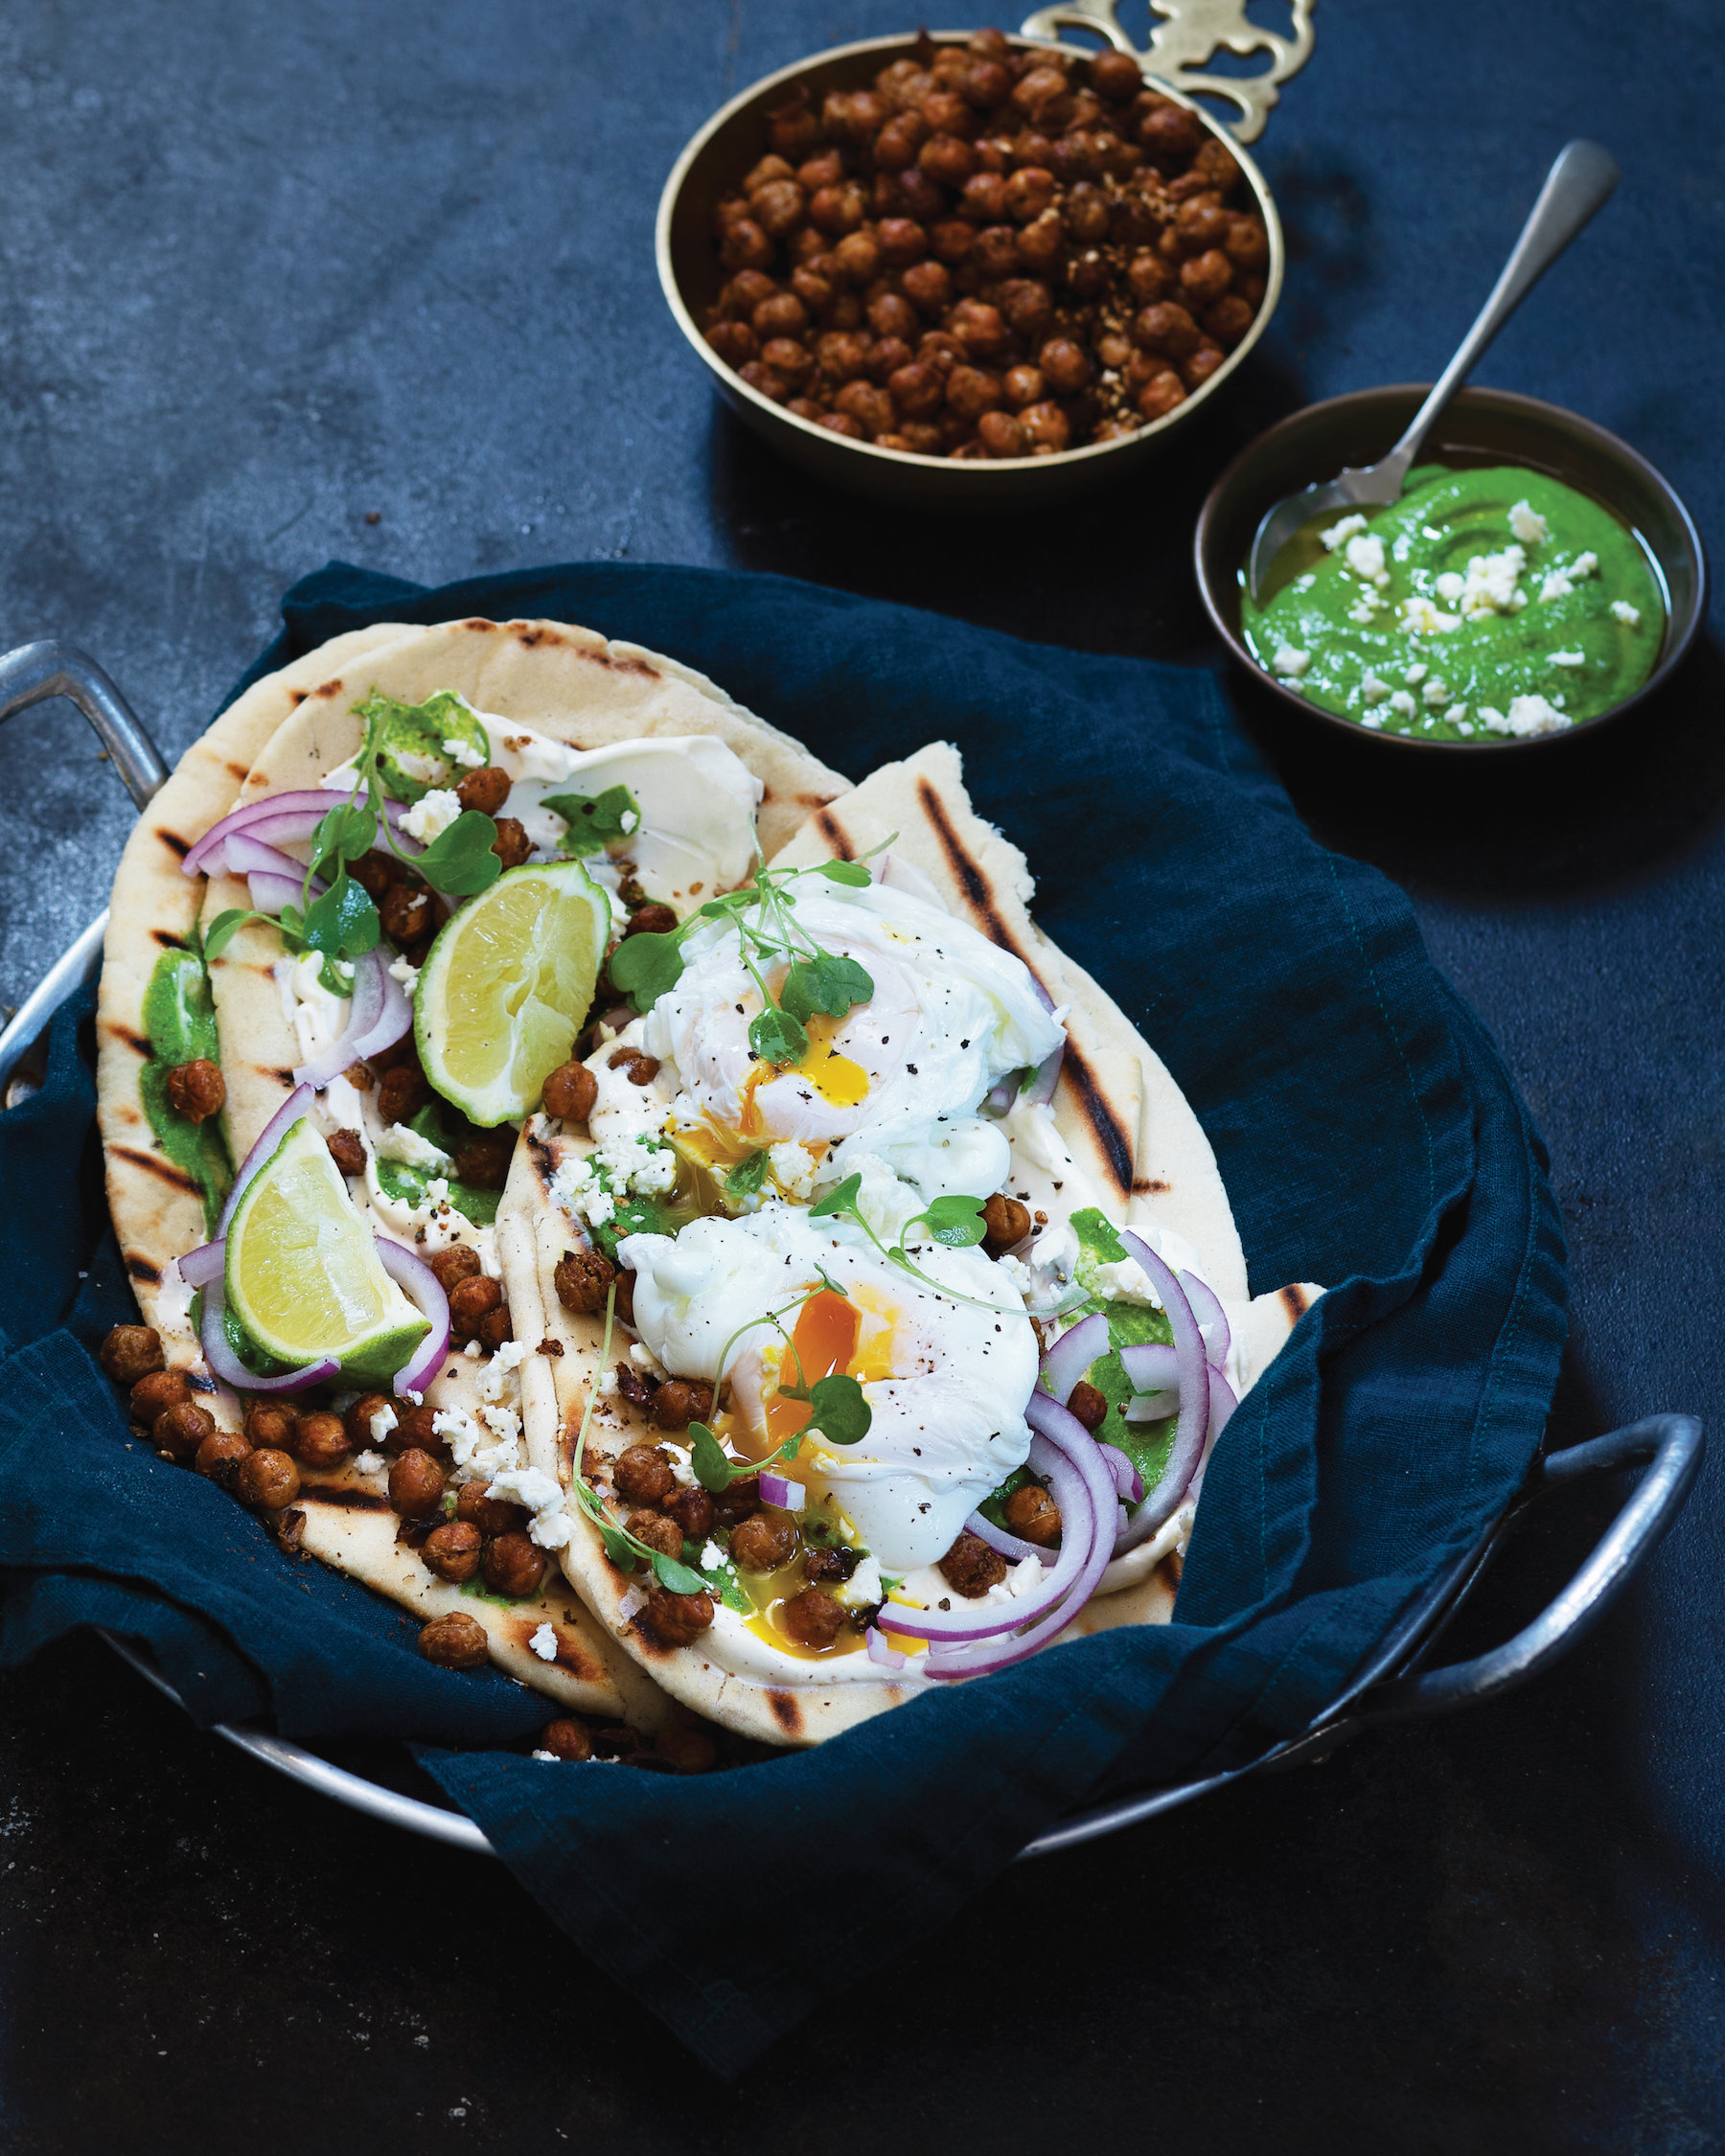 Read more about the article Grilled breakfast naan with spinach pesto and chickpeas